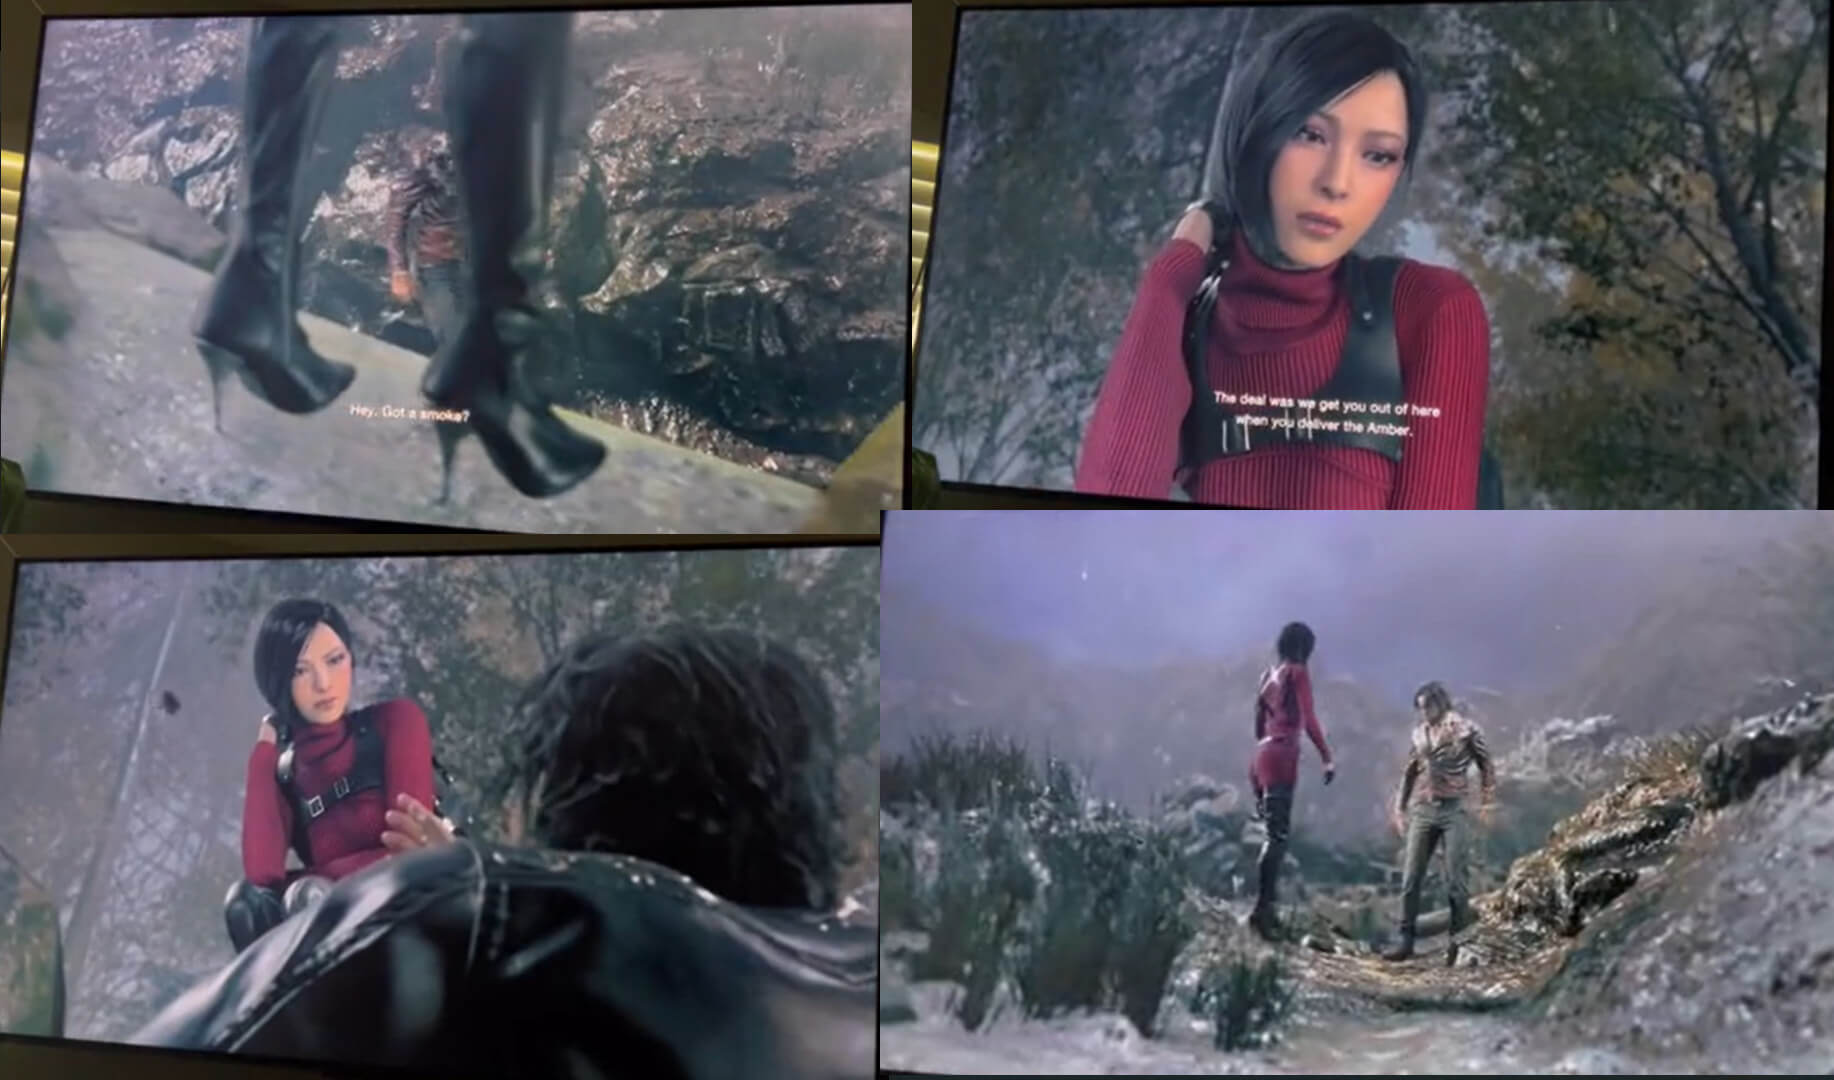 RE4-Ada Wong-leaked images